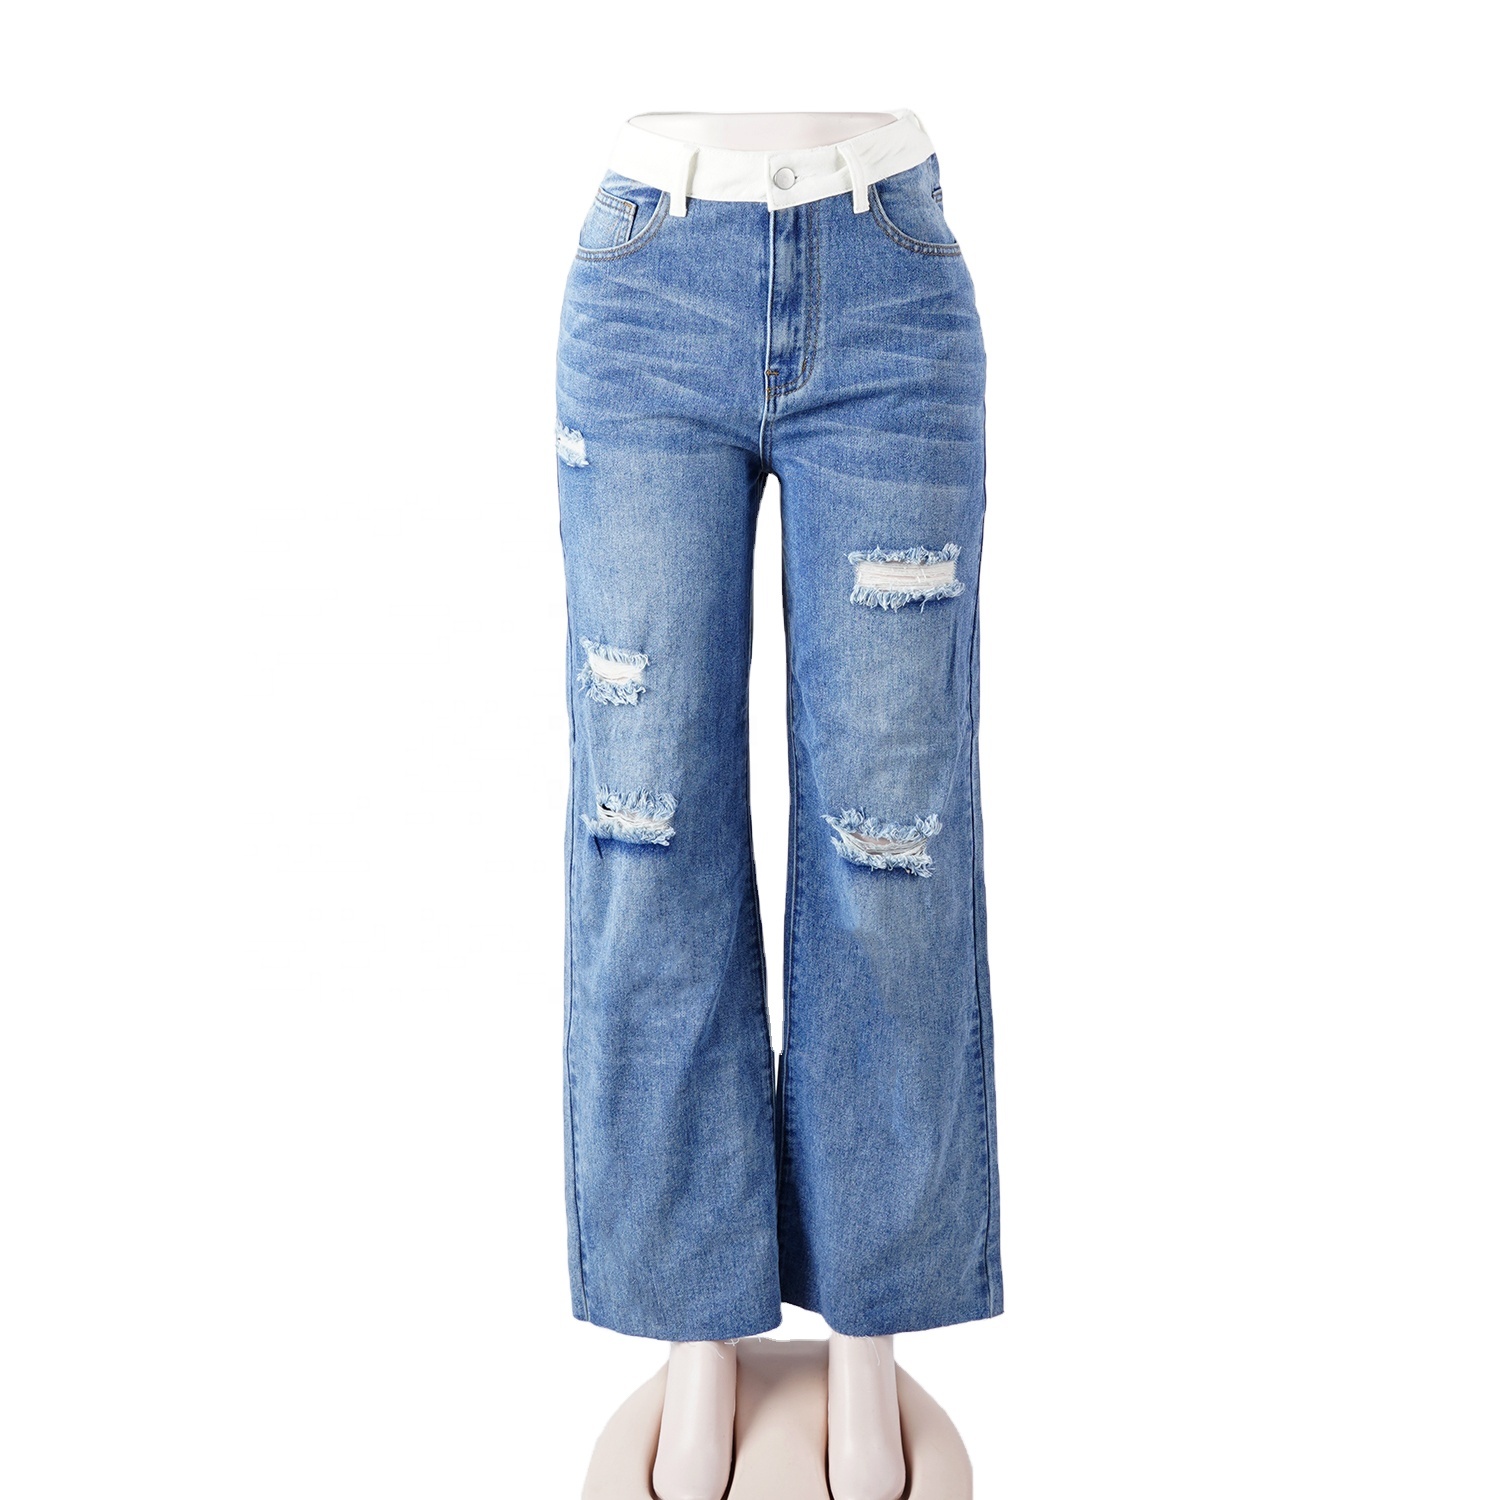 SKYKINGDOM American style design jeans loose fit pants ripped blue denim jeans for woman